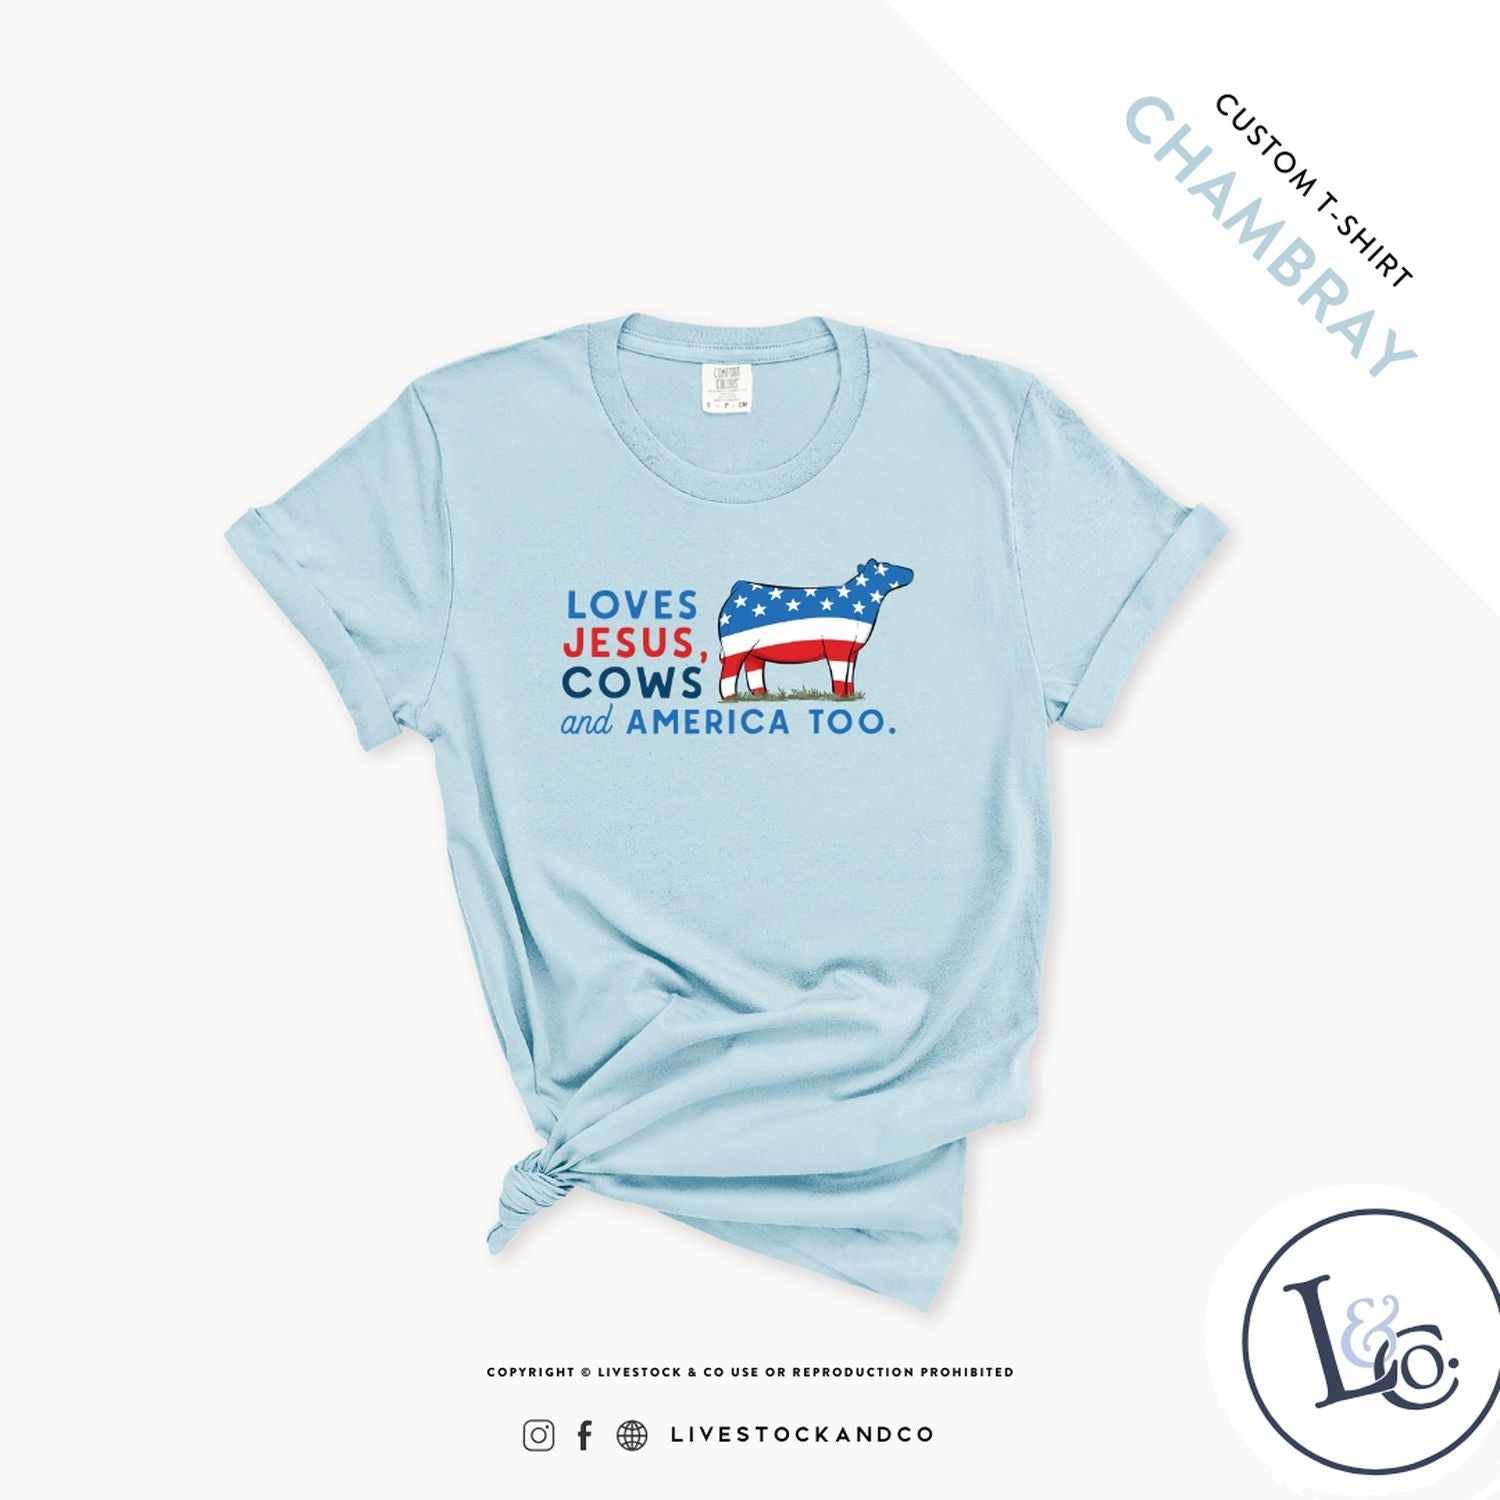 Custom Made Loves Jesus, Cows and America Too - Youth T-Shirt Stock Show Livestock - Livestock &amp; Co. Boutique